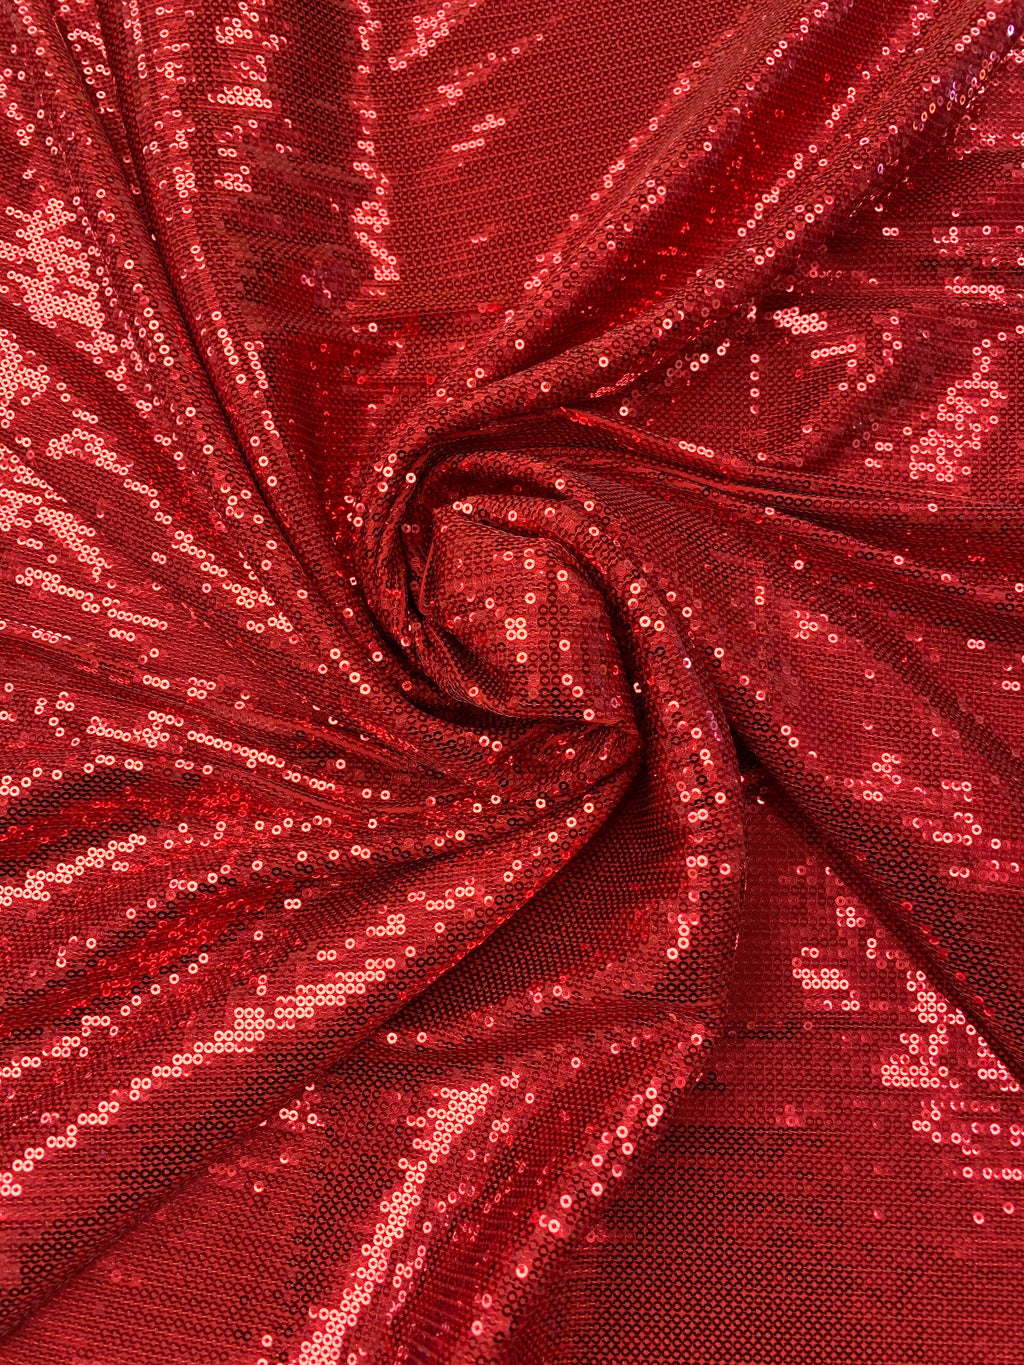 Embroidered Sequins Red